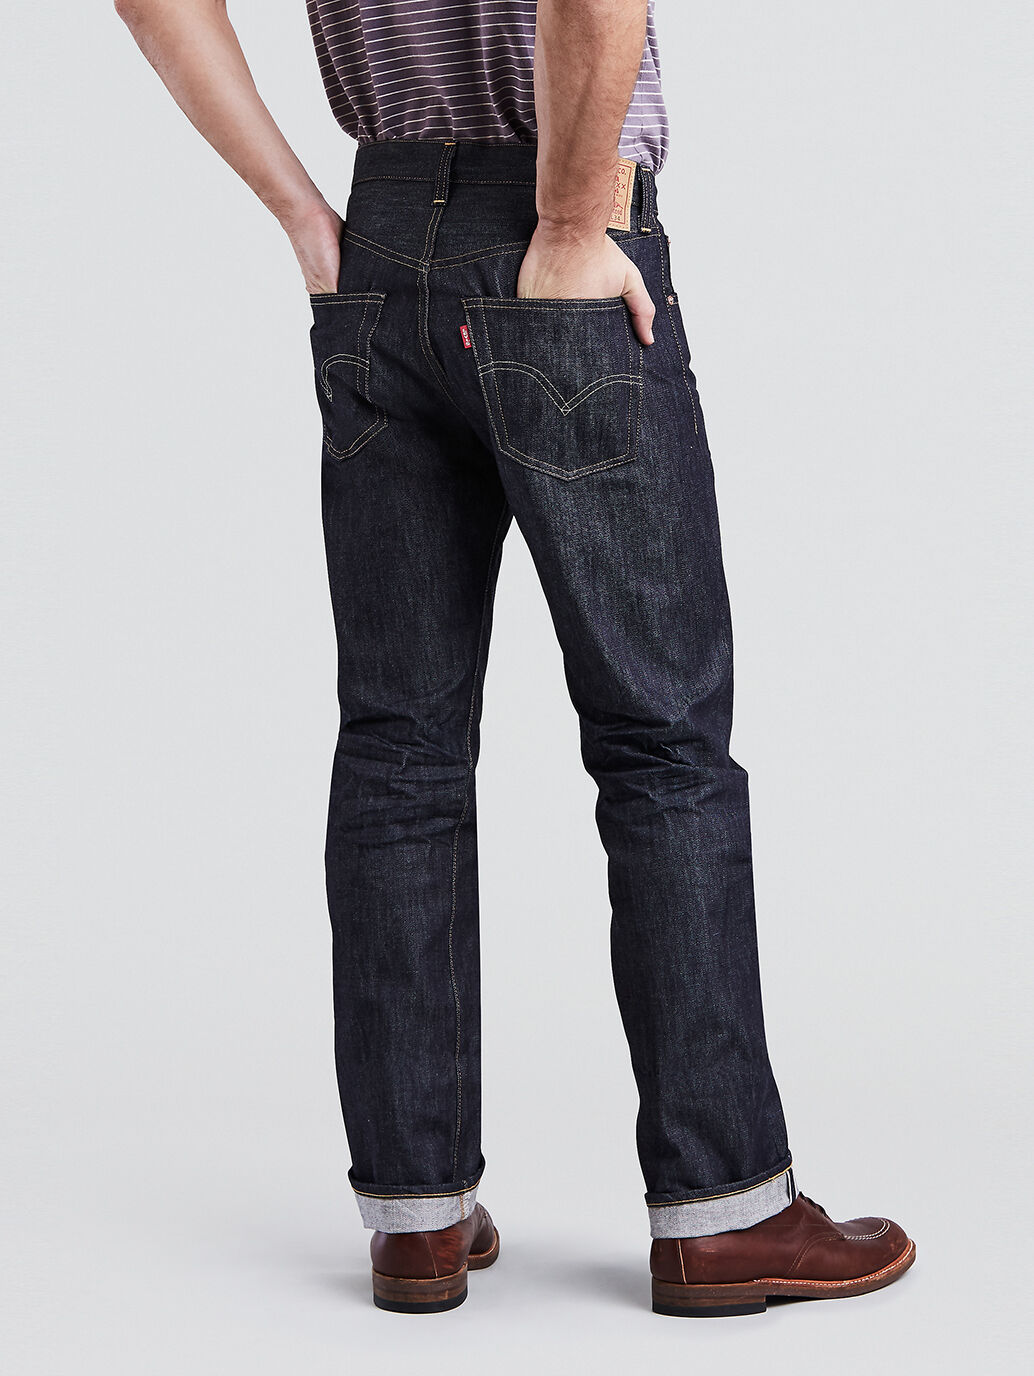 Levi's® Vintage Clothing 1947 501® Jeans in Rigid